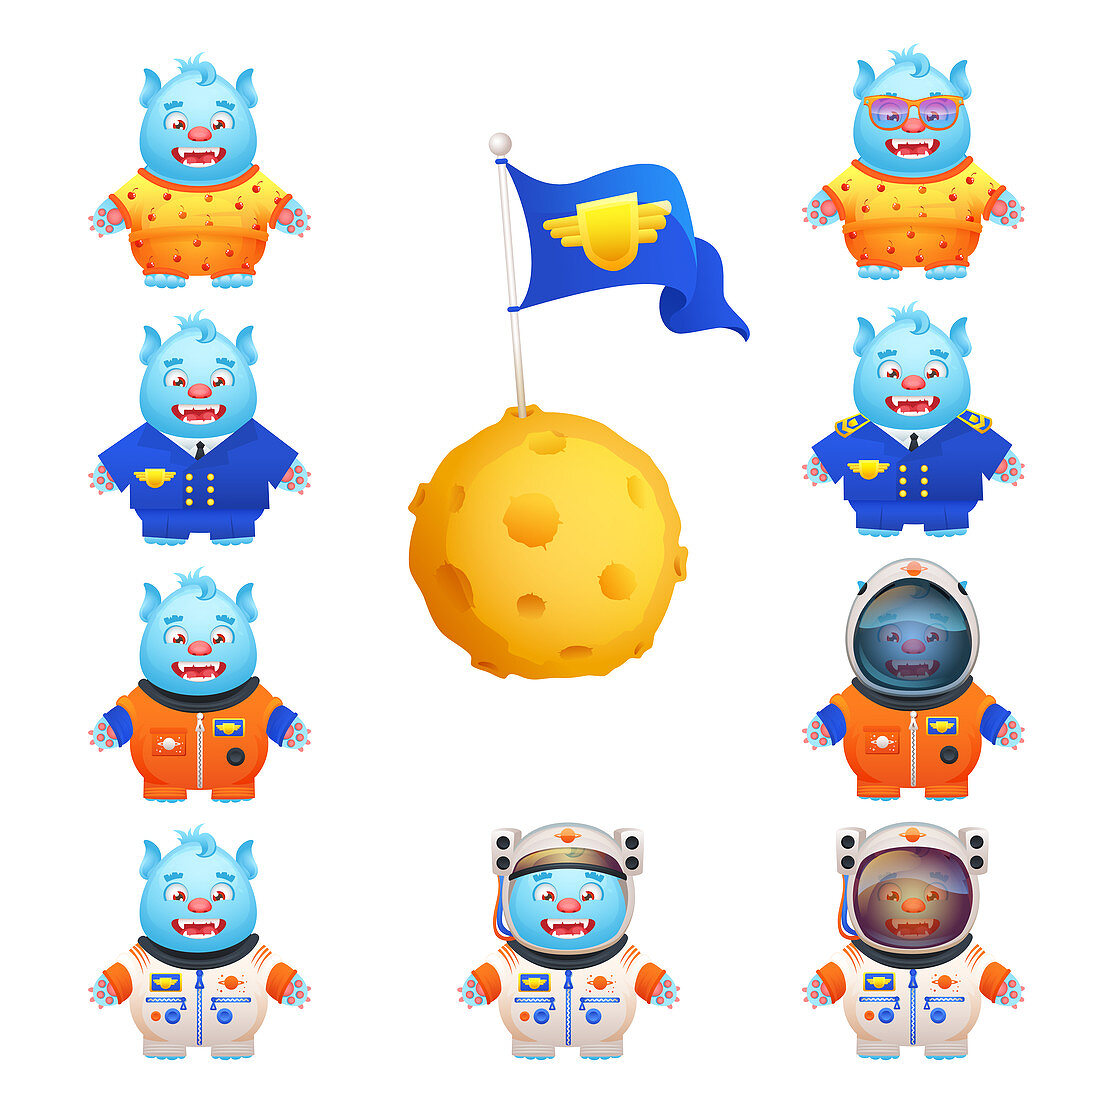 Space monster icons, illustration